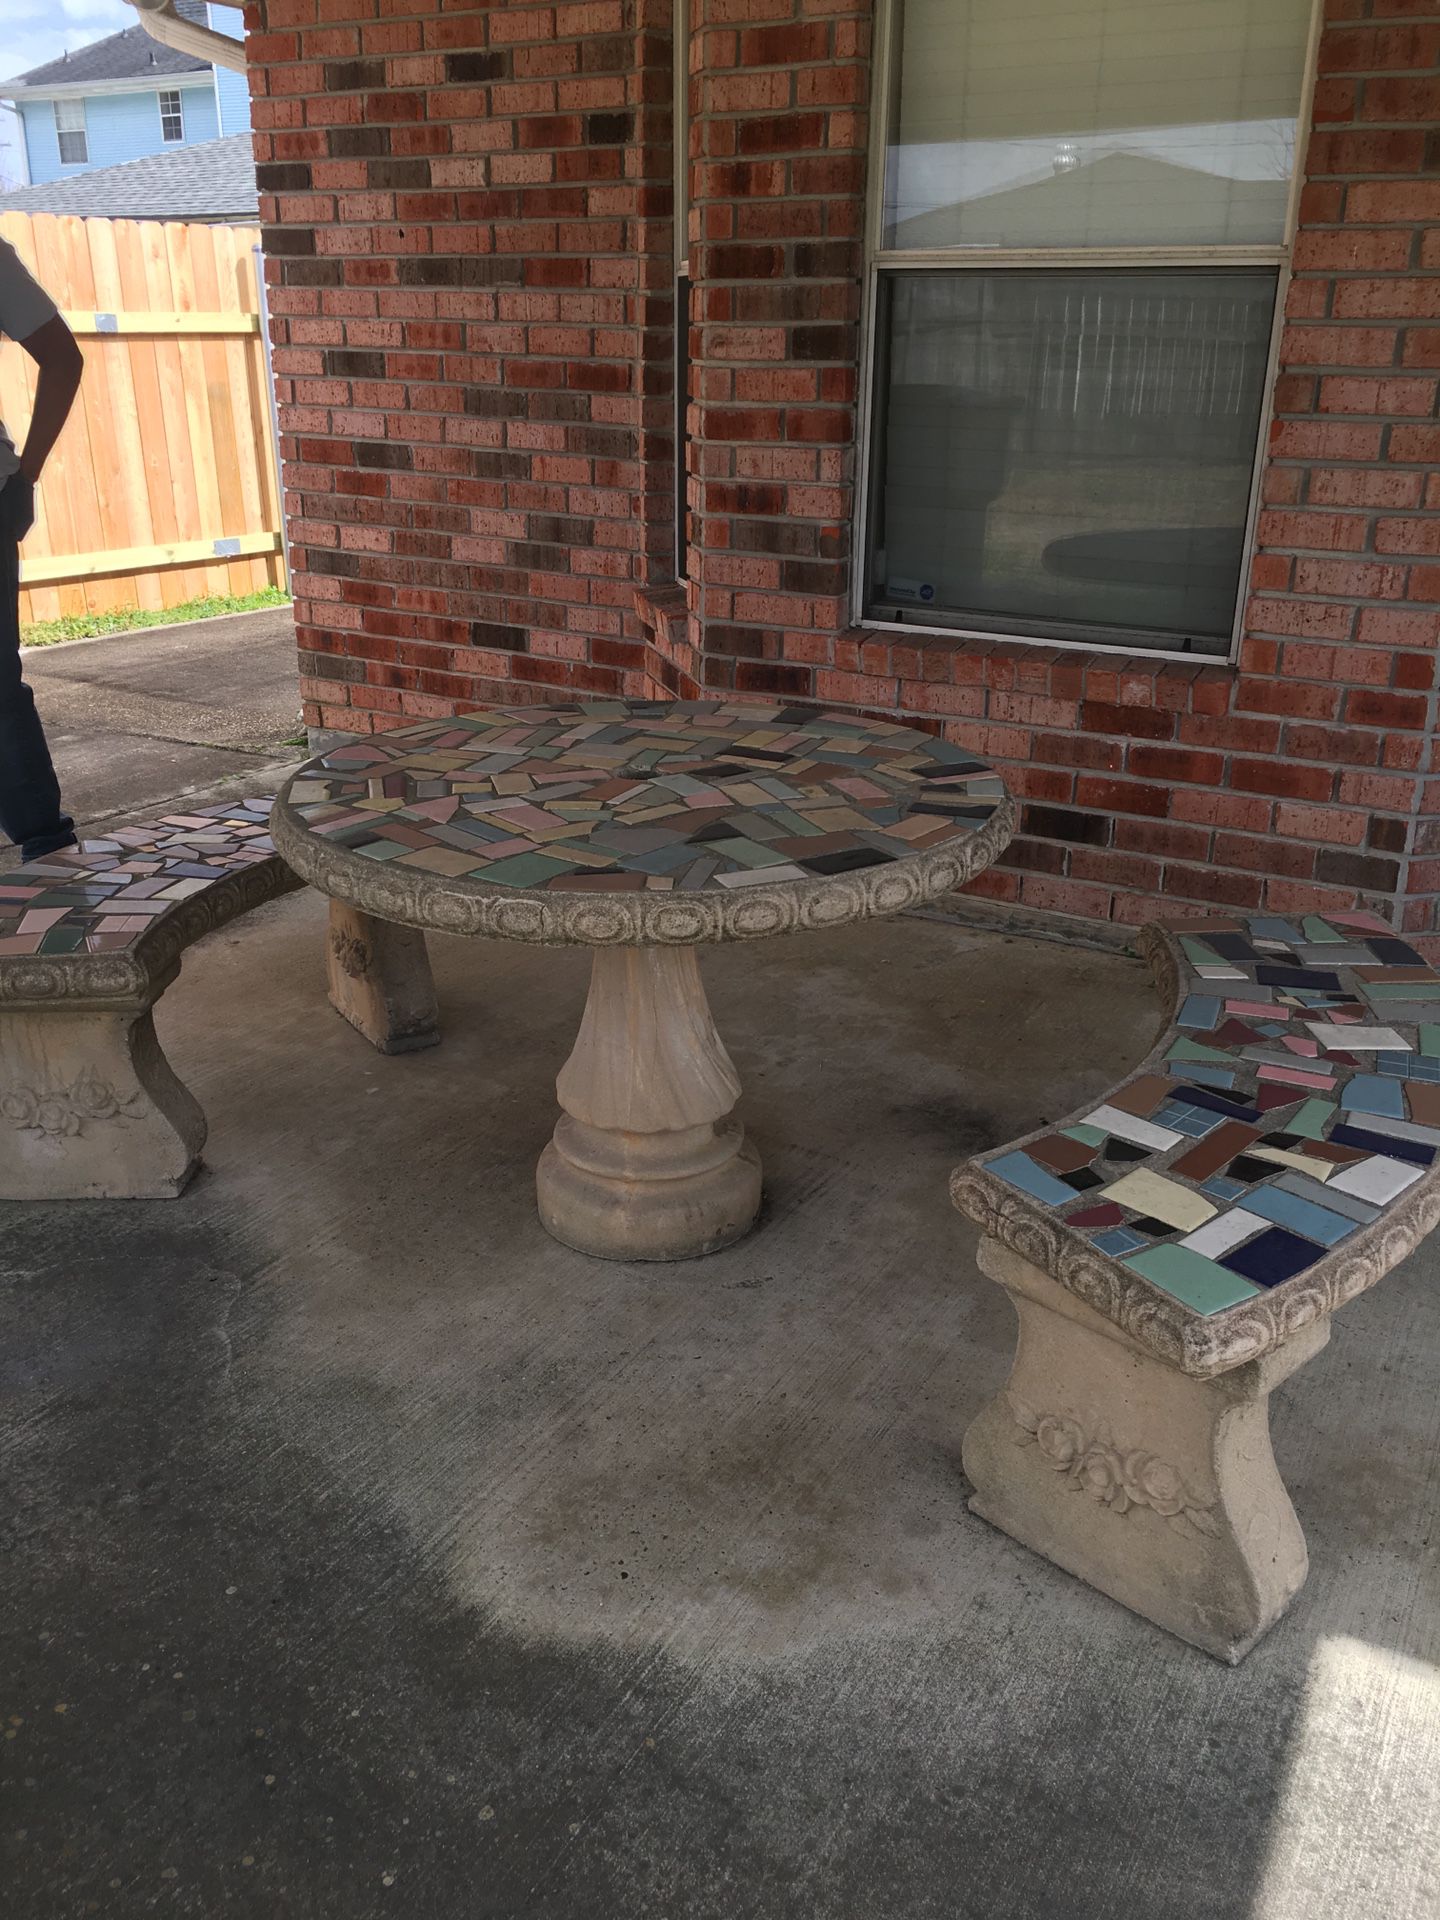 Patio Furniture:  Concrete Tile Inlay  Round Table With Curved Benches, Prayer Concrete Bench And Concrete Statue Table  Make Offer Separate Or Group